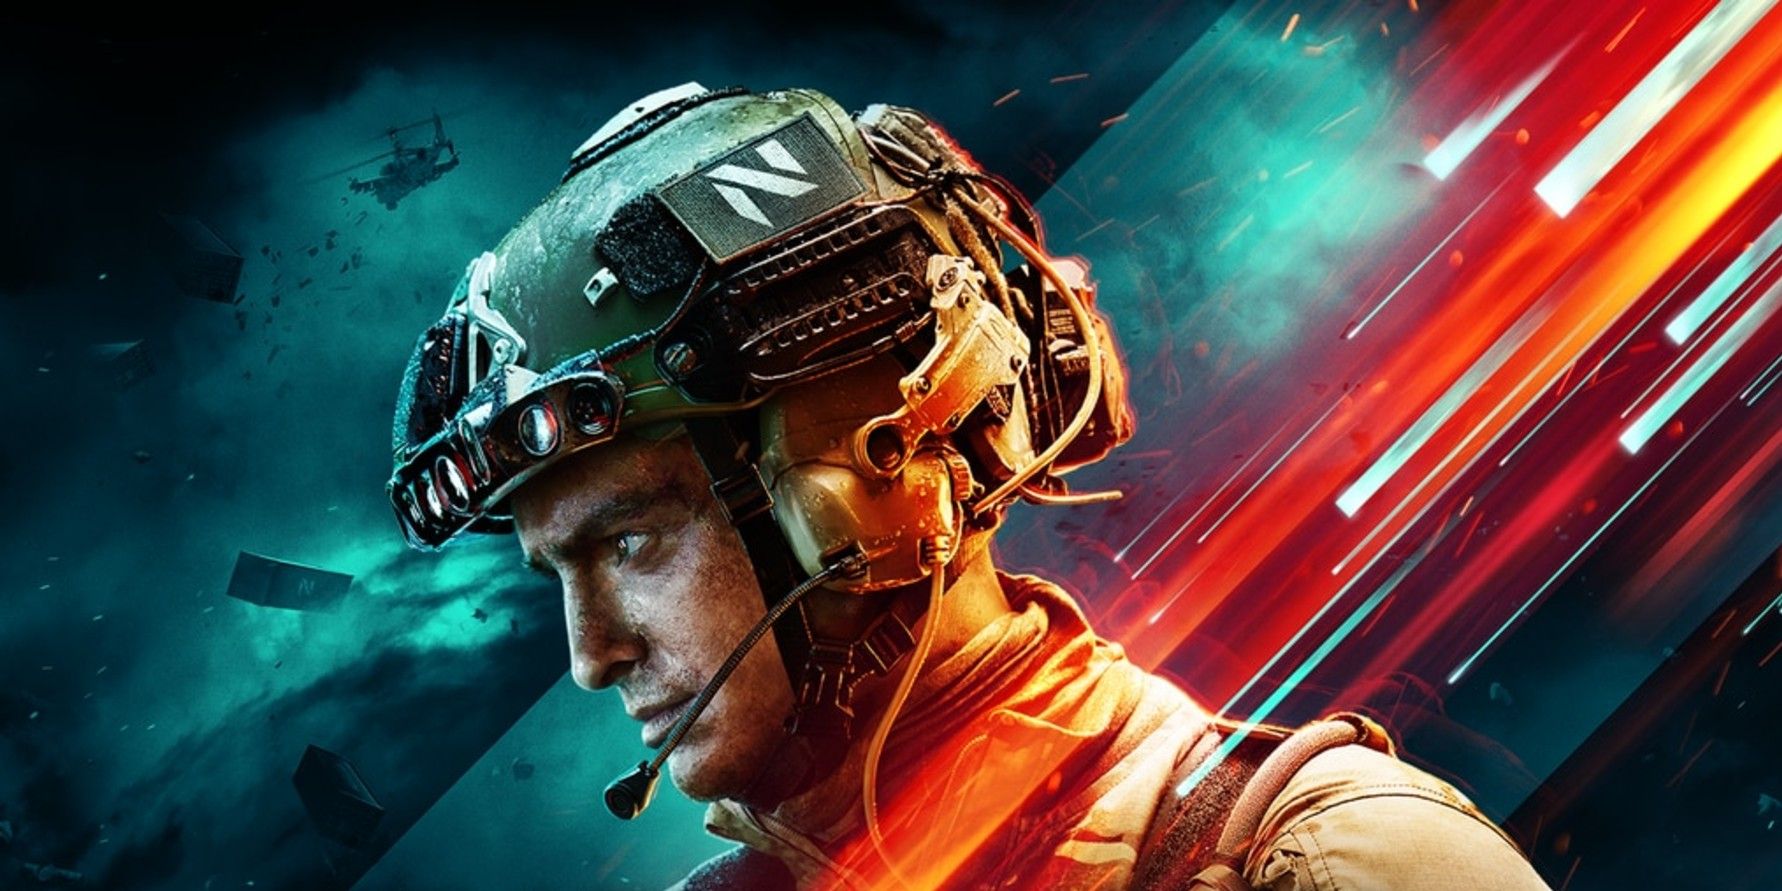 A close-up of a male character in the Battlefield 2042 poster.